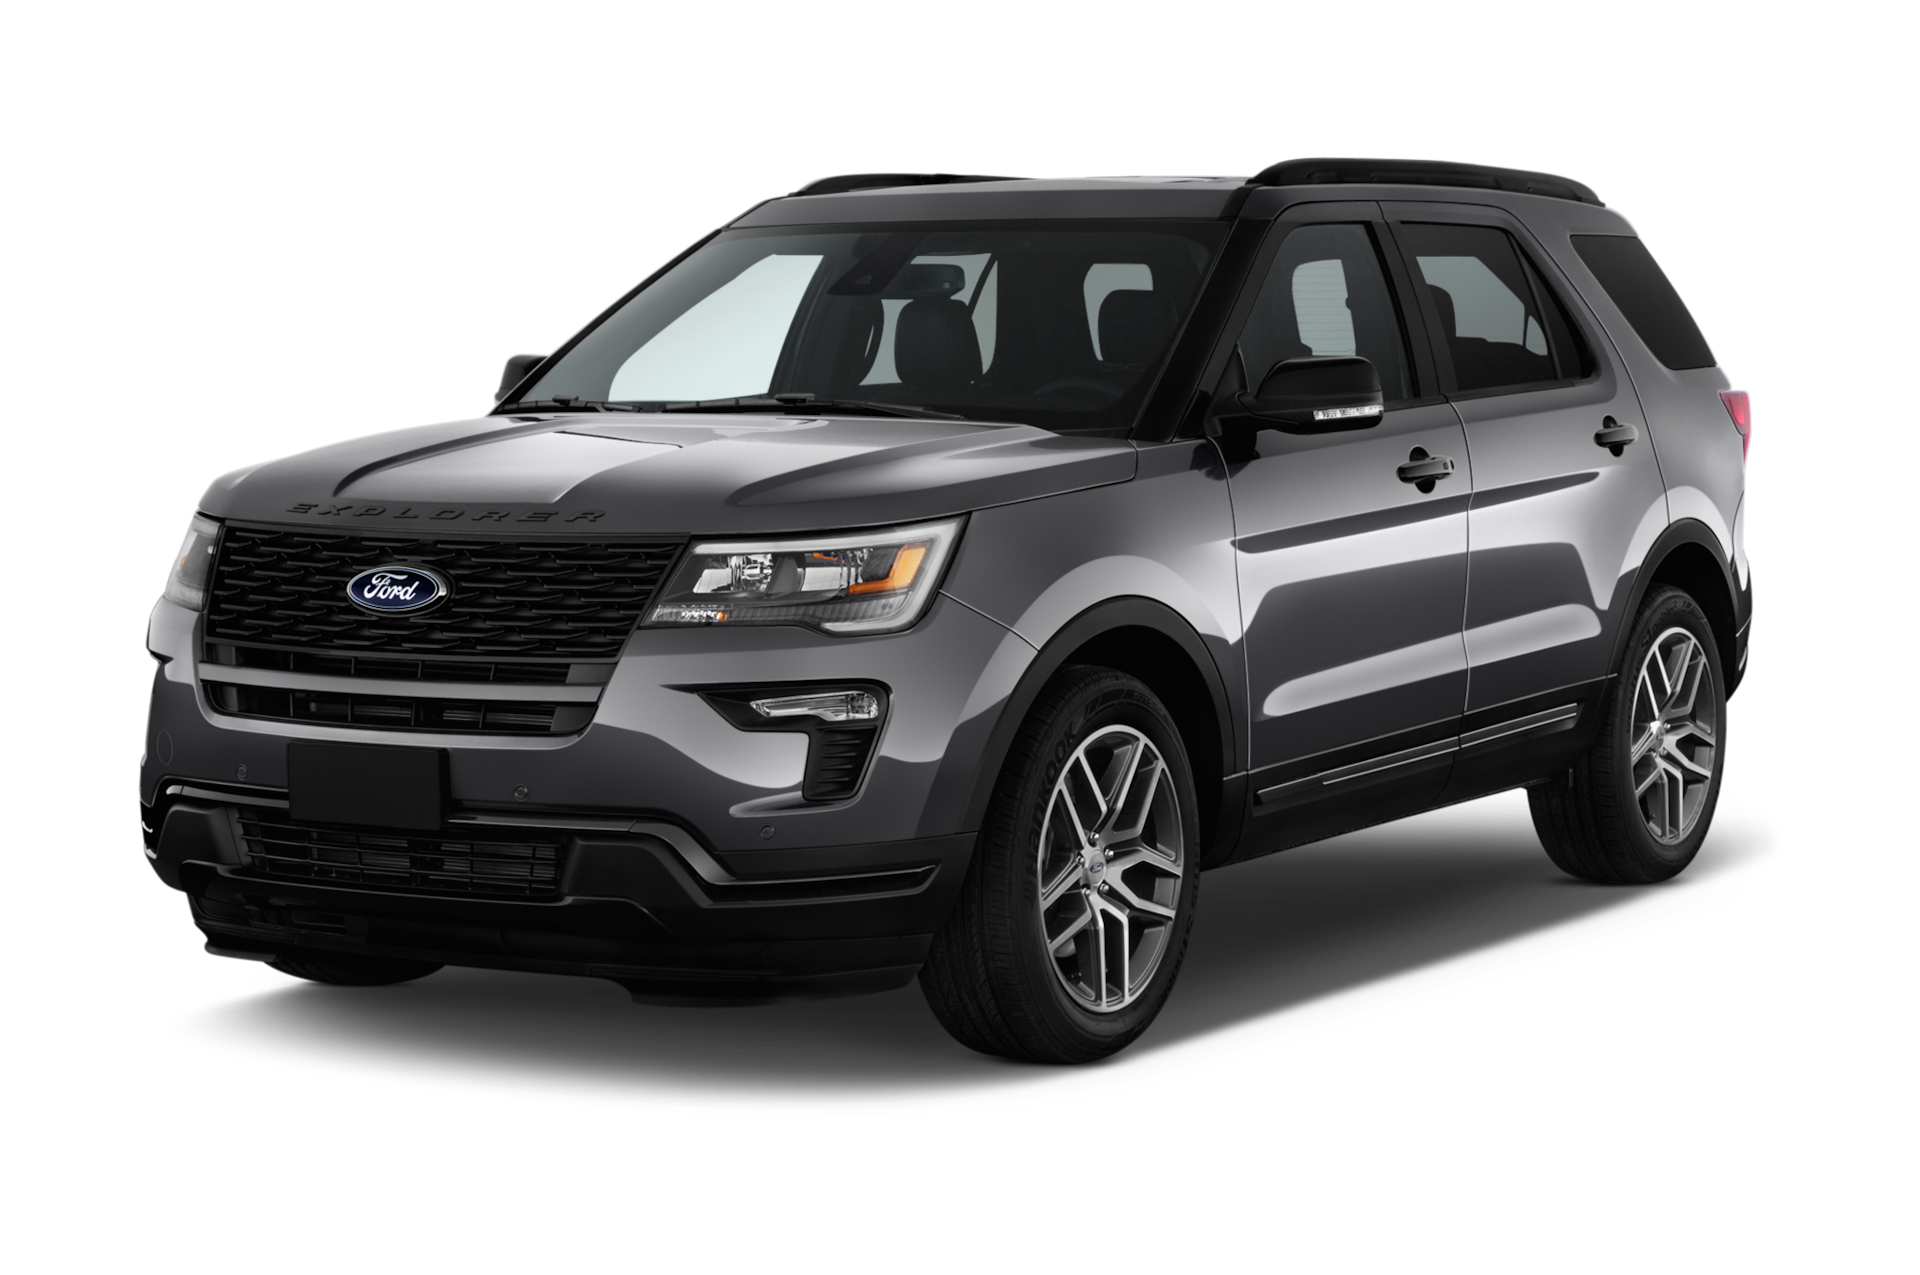 2019 Ford Explorer Prices, Reviews, and Photos - MotorTrend